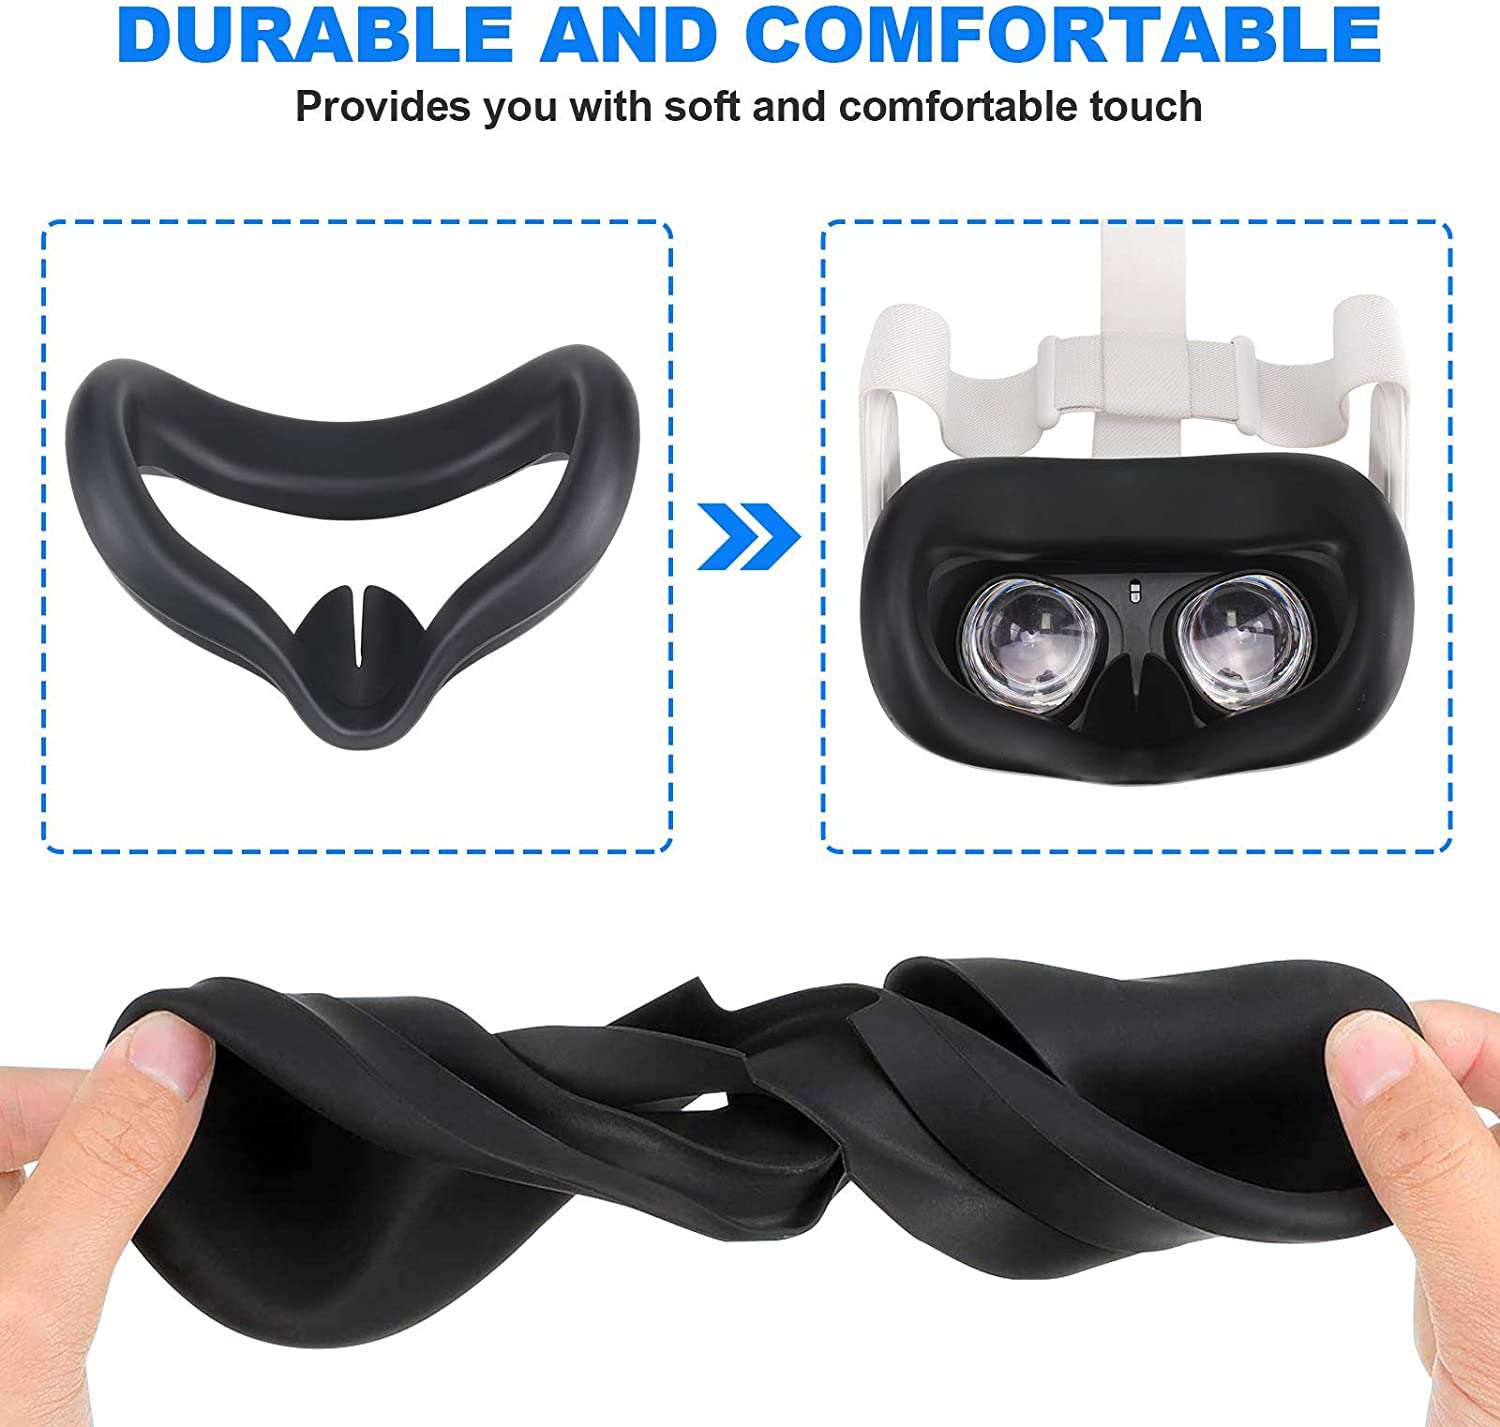 Comfortable and flexible VR mask, fits well on VR headset.